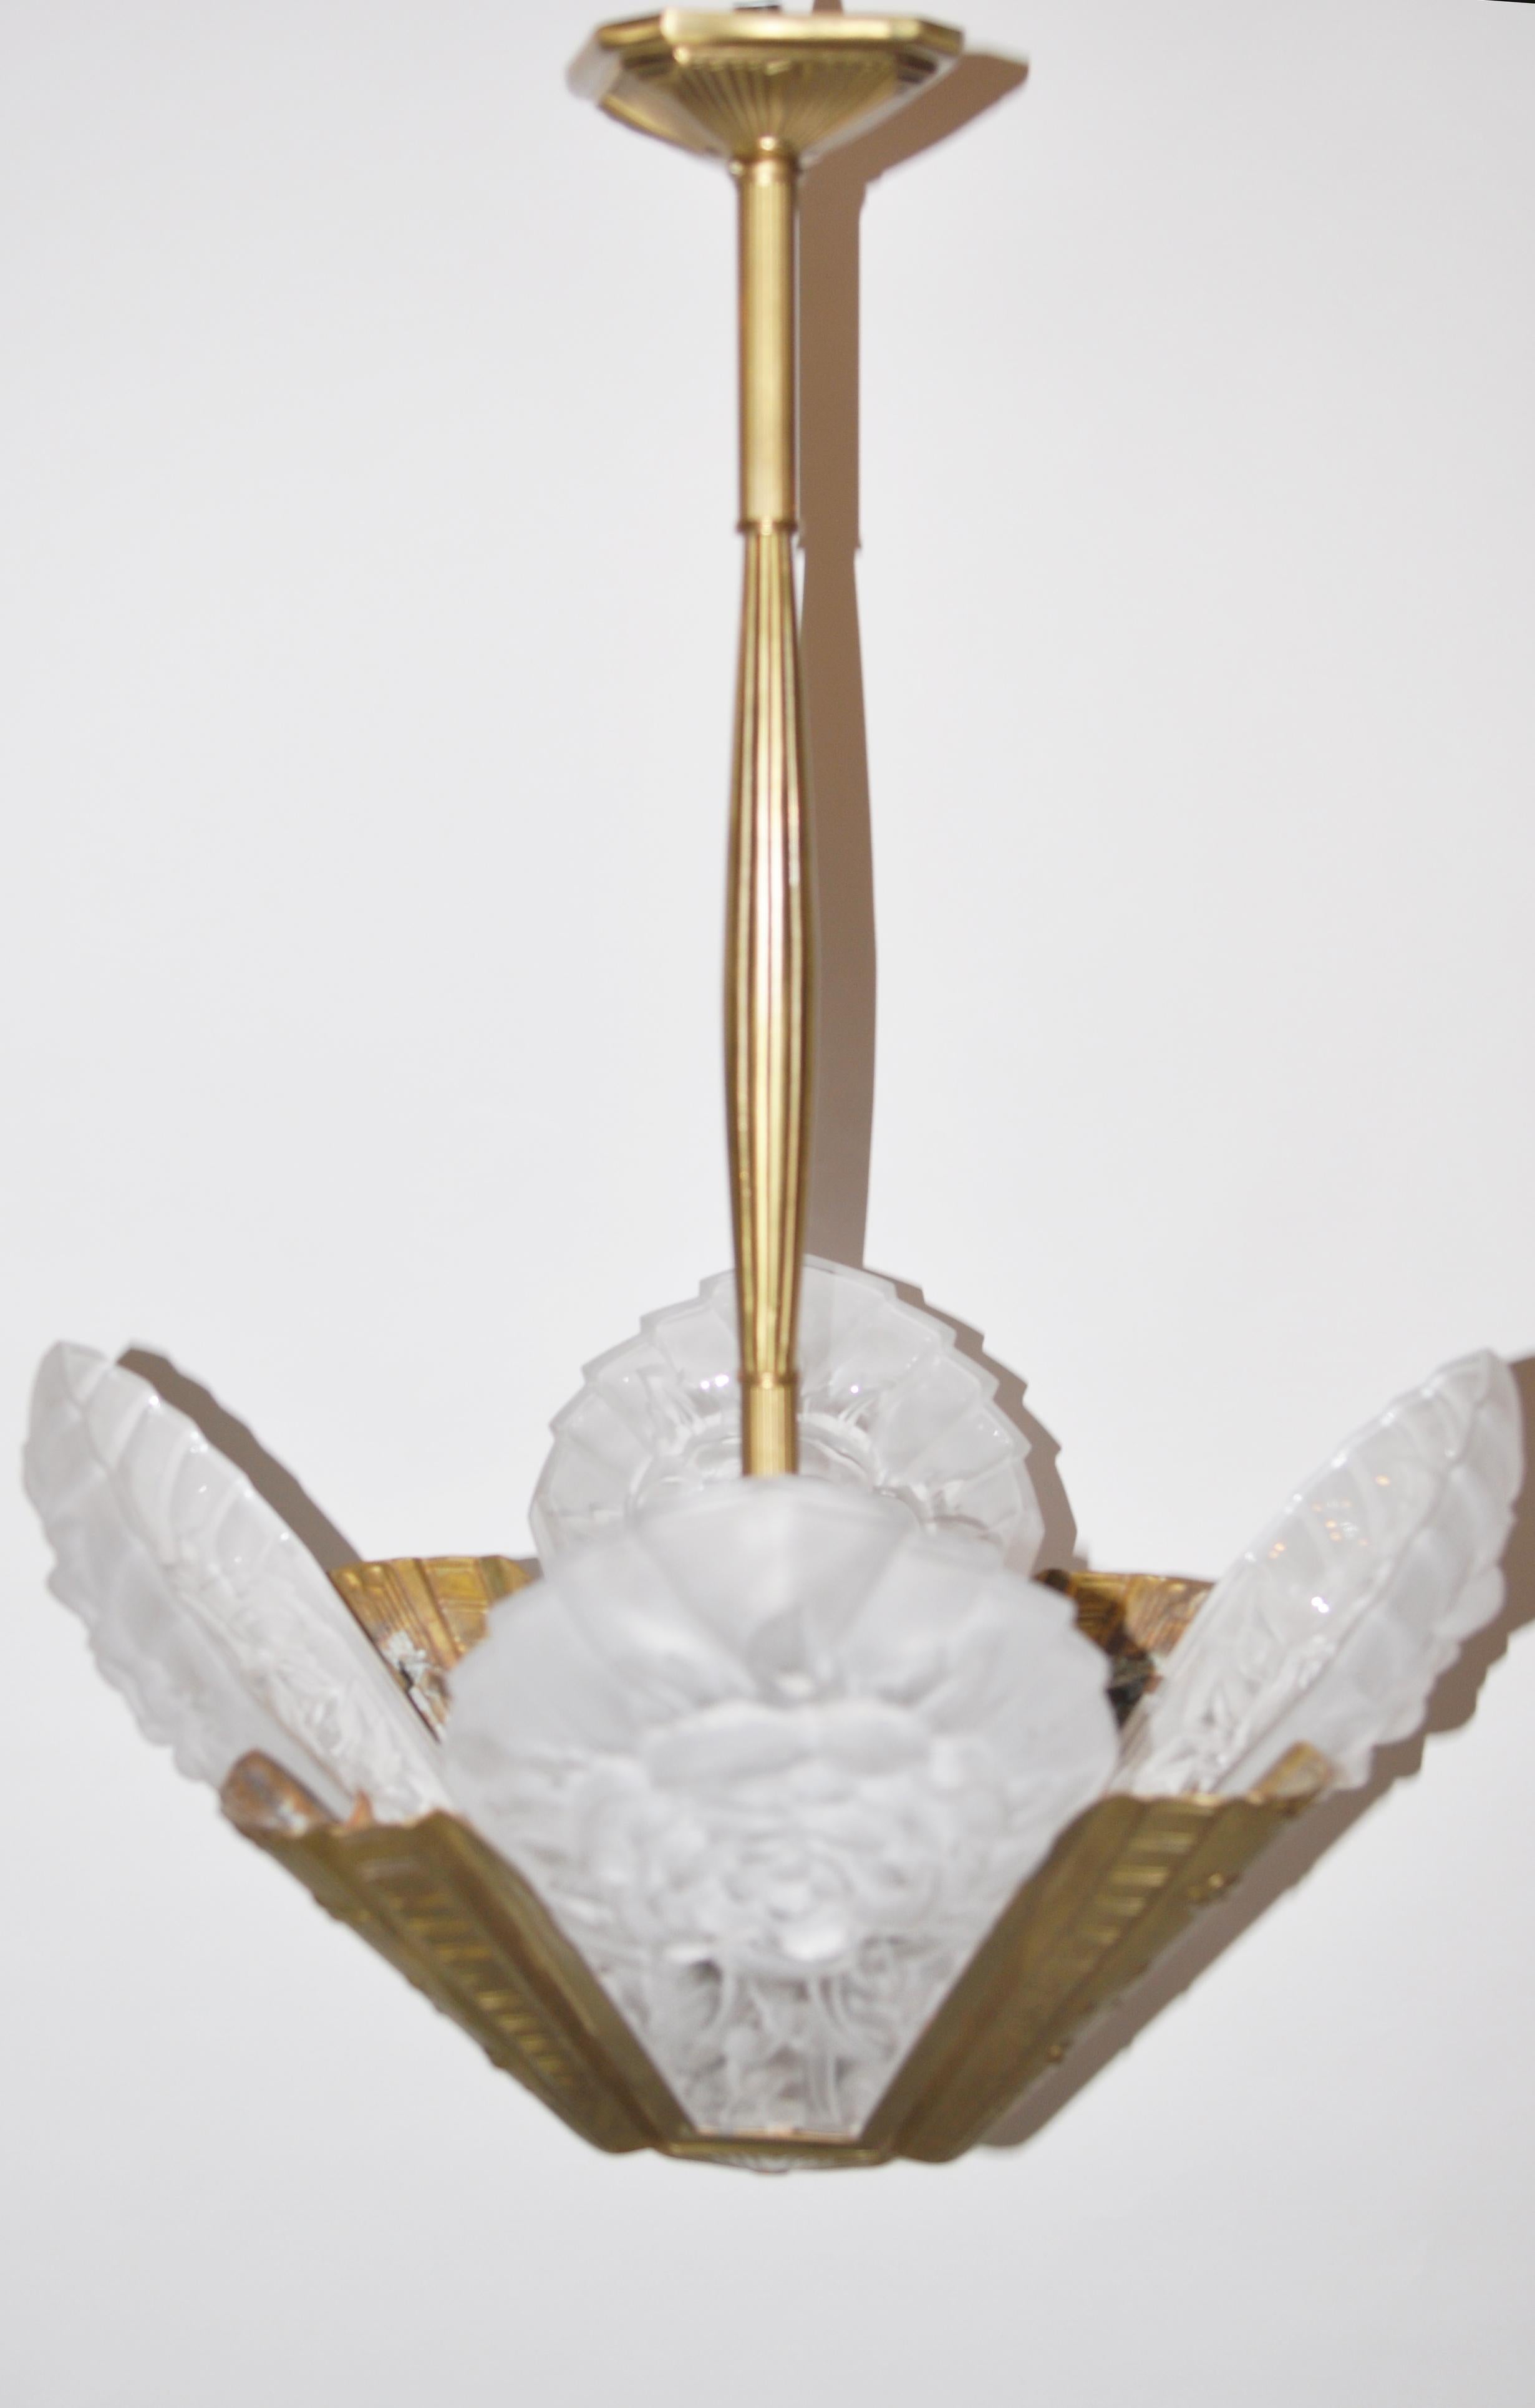 French Art Deco chandelier, made of gilded brass with clear and frosted glass. The central pole can be easy shortened 8